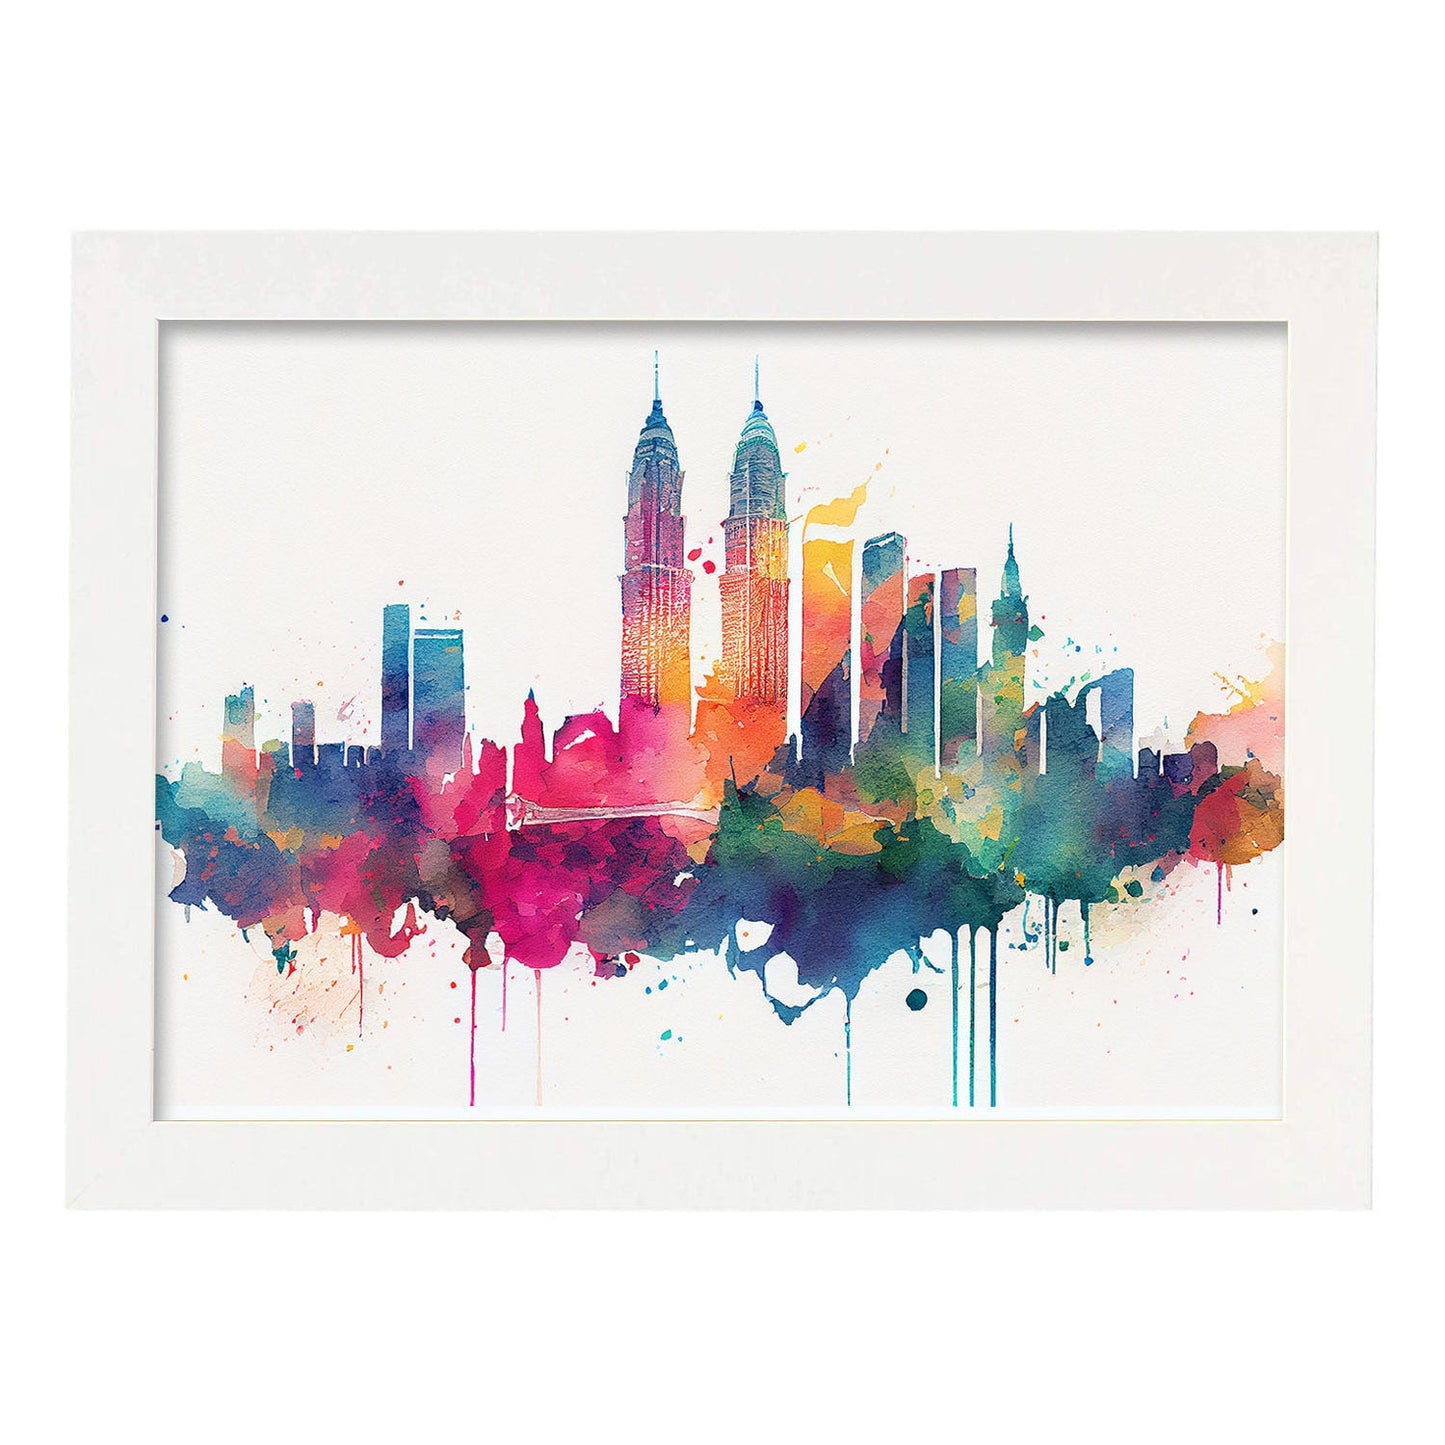 Nacnic watercolor of a skyline of the city of Kuala Lumpur_1. Aesthetic Wall Art Prints for Bedroom or Living Room Design.-Artwork-Nacnic-A4-Marco Blanco-Nacnic Estudio SL